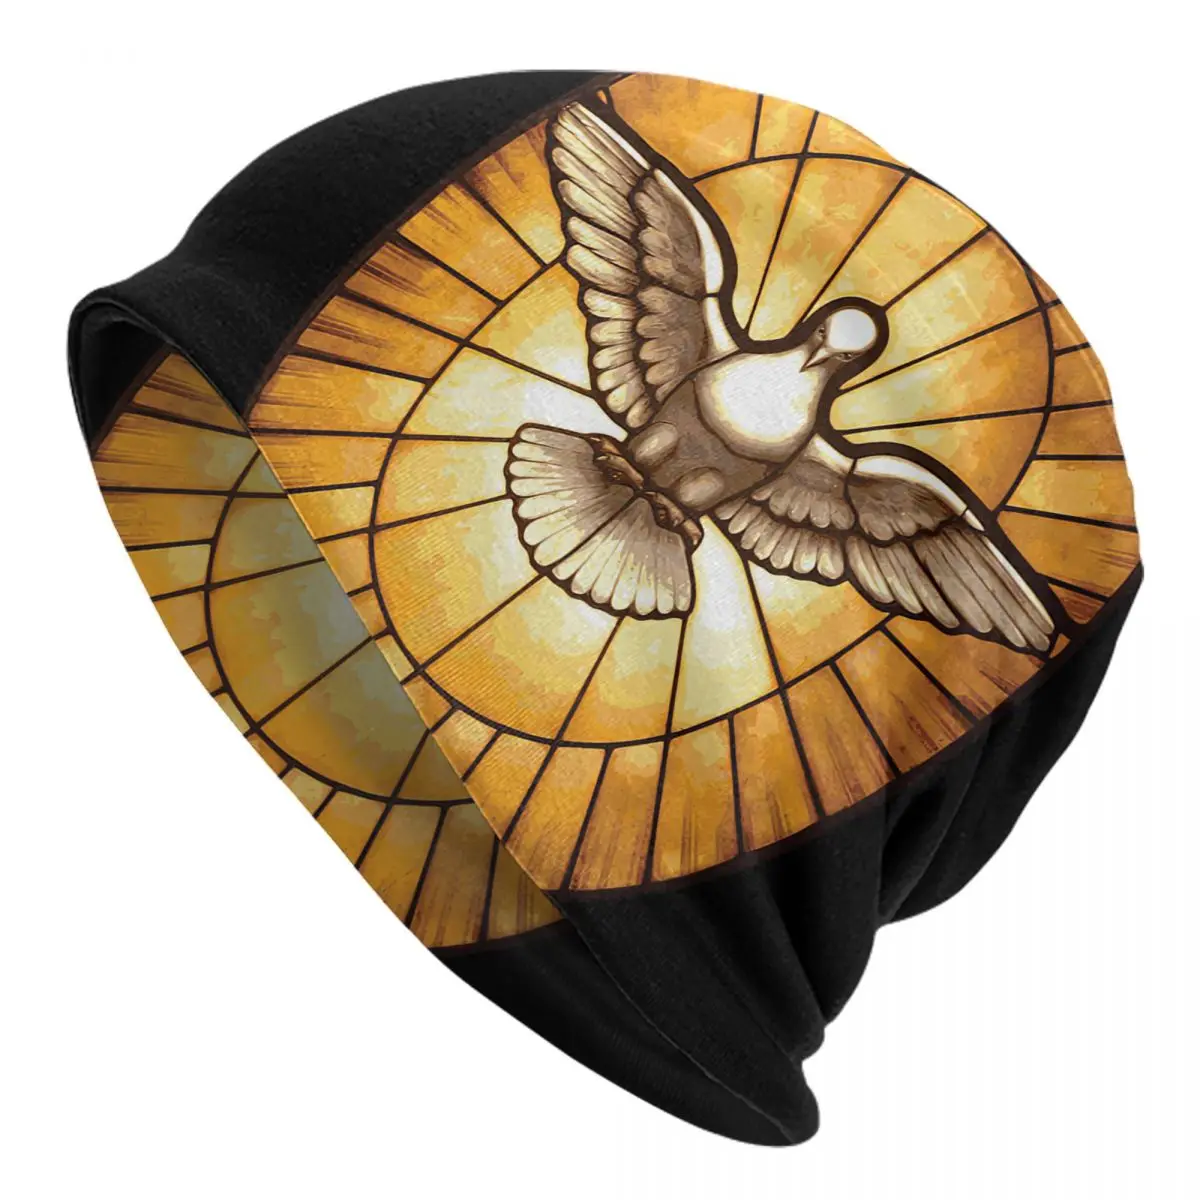 Holy Spirit Dove From St. Peter's Basilica Adult Men's Women's Knit Hat Keep warm winter Funny knitted hat